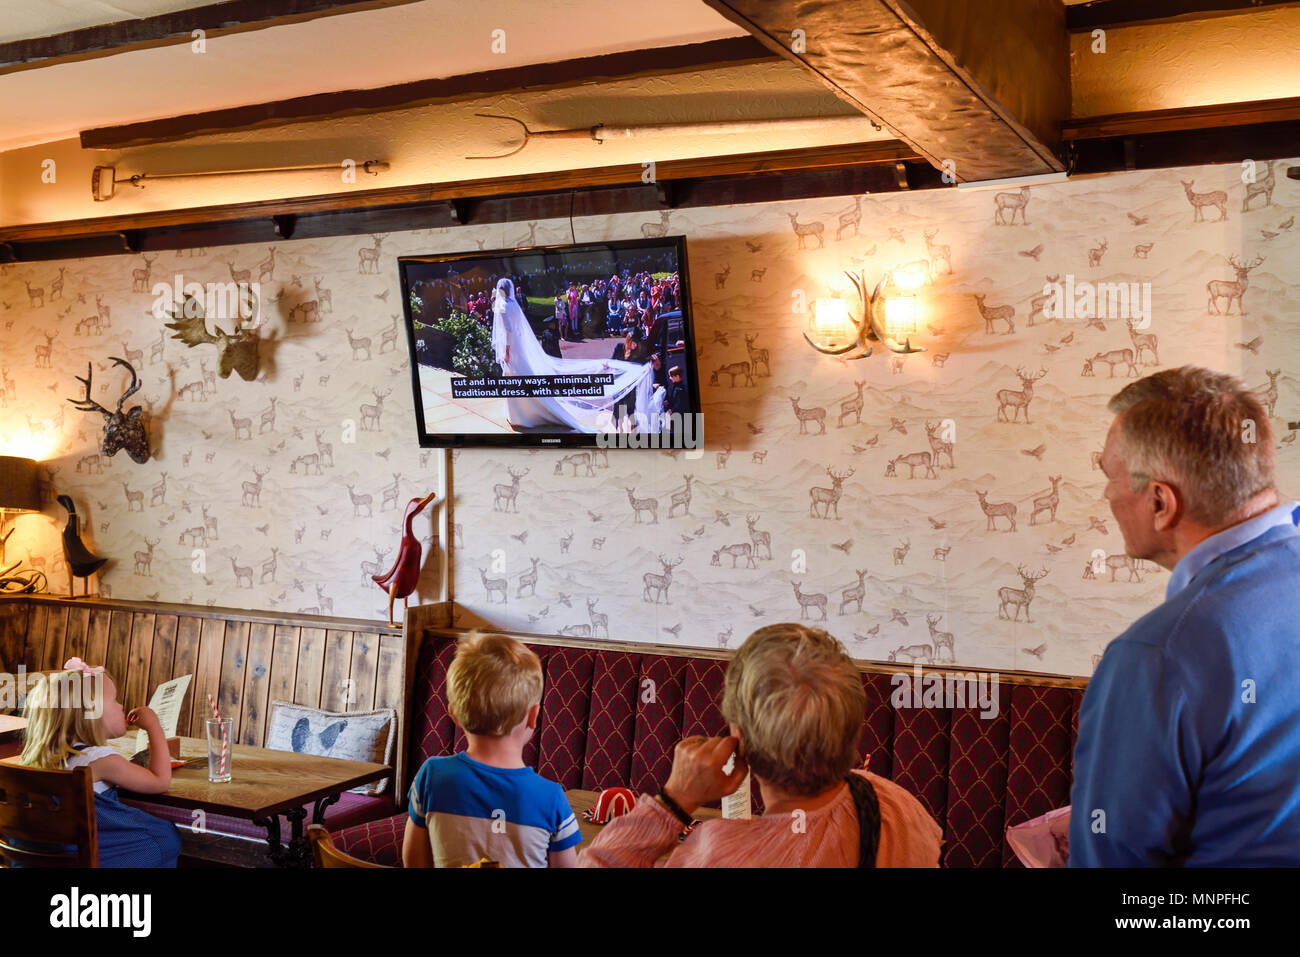 Orston, Nottinghamshire, UK: 19th May 2018. Villagers in the Nottinghamshire village of Orston celebrate with a street party and church service the royal wedding of Prince Harry and Meghan Markle.Durham Ox Inn Orston village pub. Credit: Ian Francis/Alamy Live News Credit: Ian Francis/Alamy Live News Stock Photo